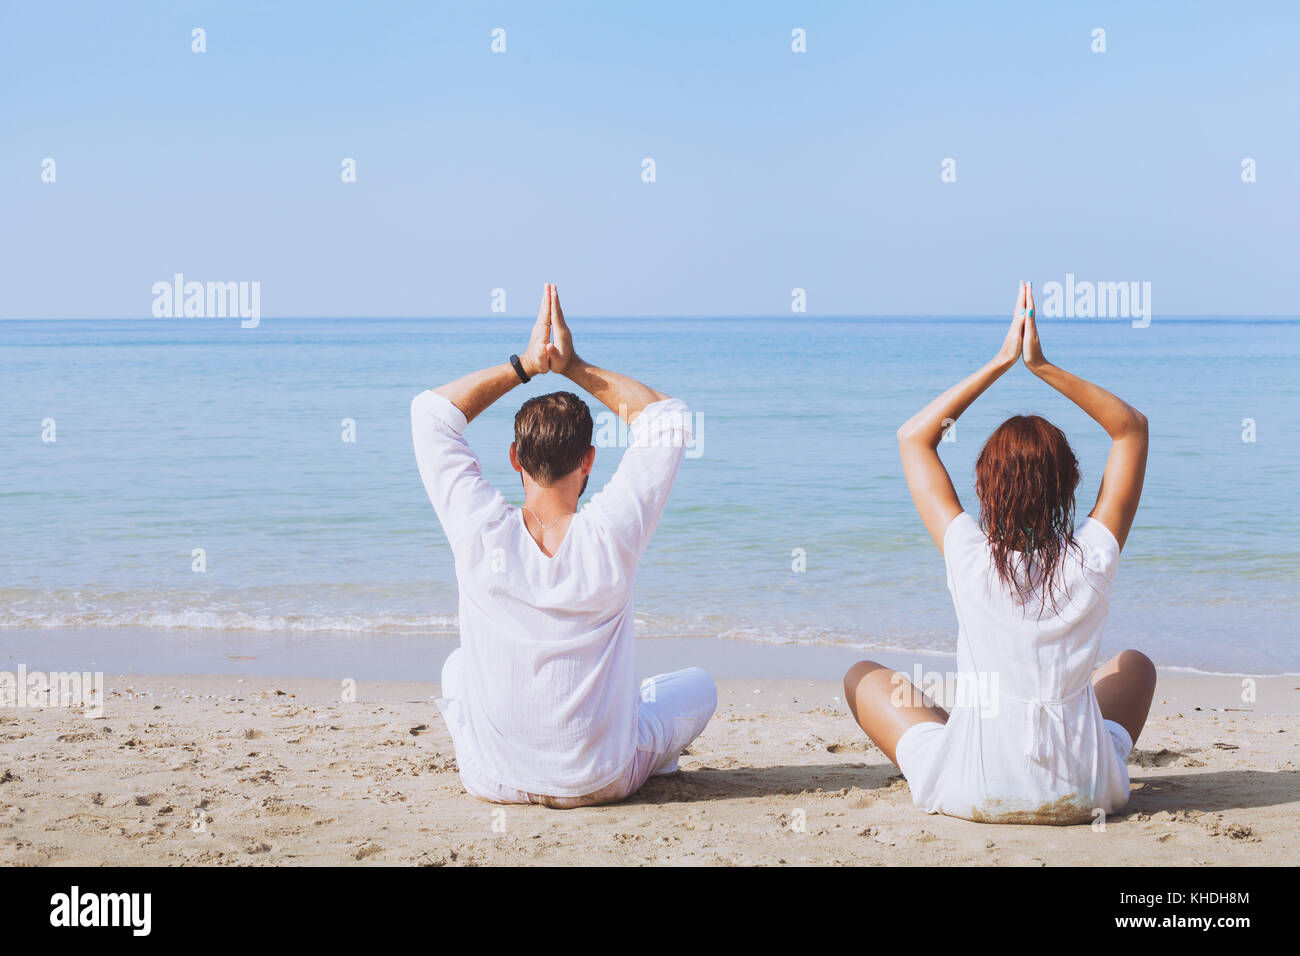 yoga on the beach, two people in white clothes practicing meditation, healthy lifestyle background Stock Photo